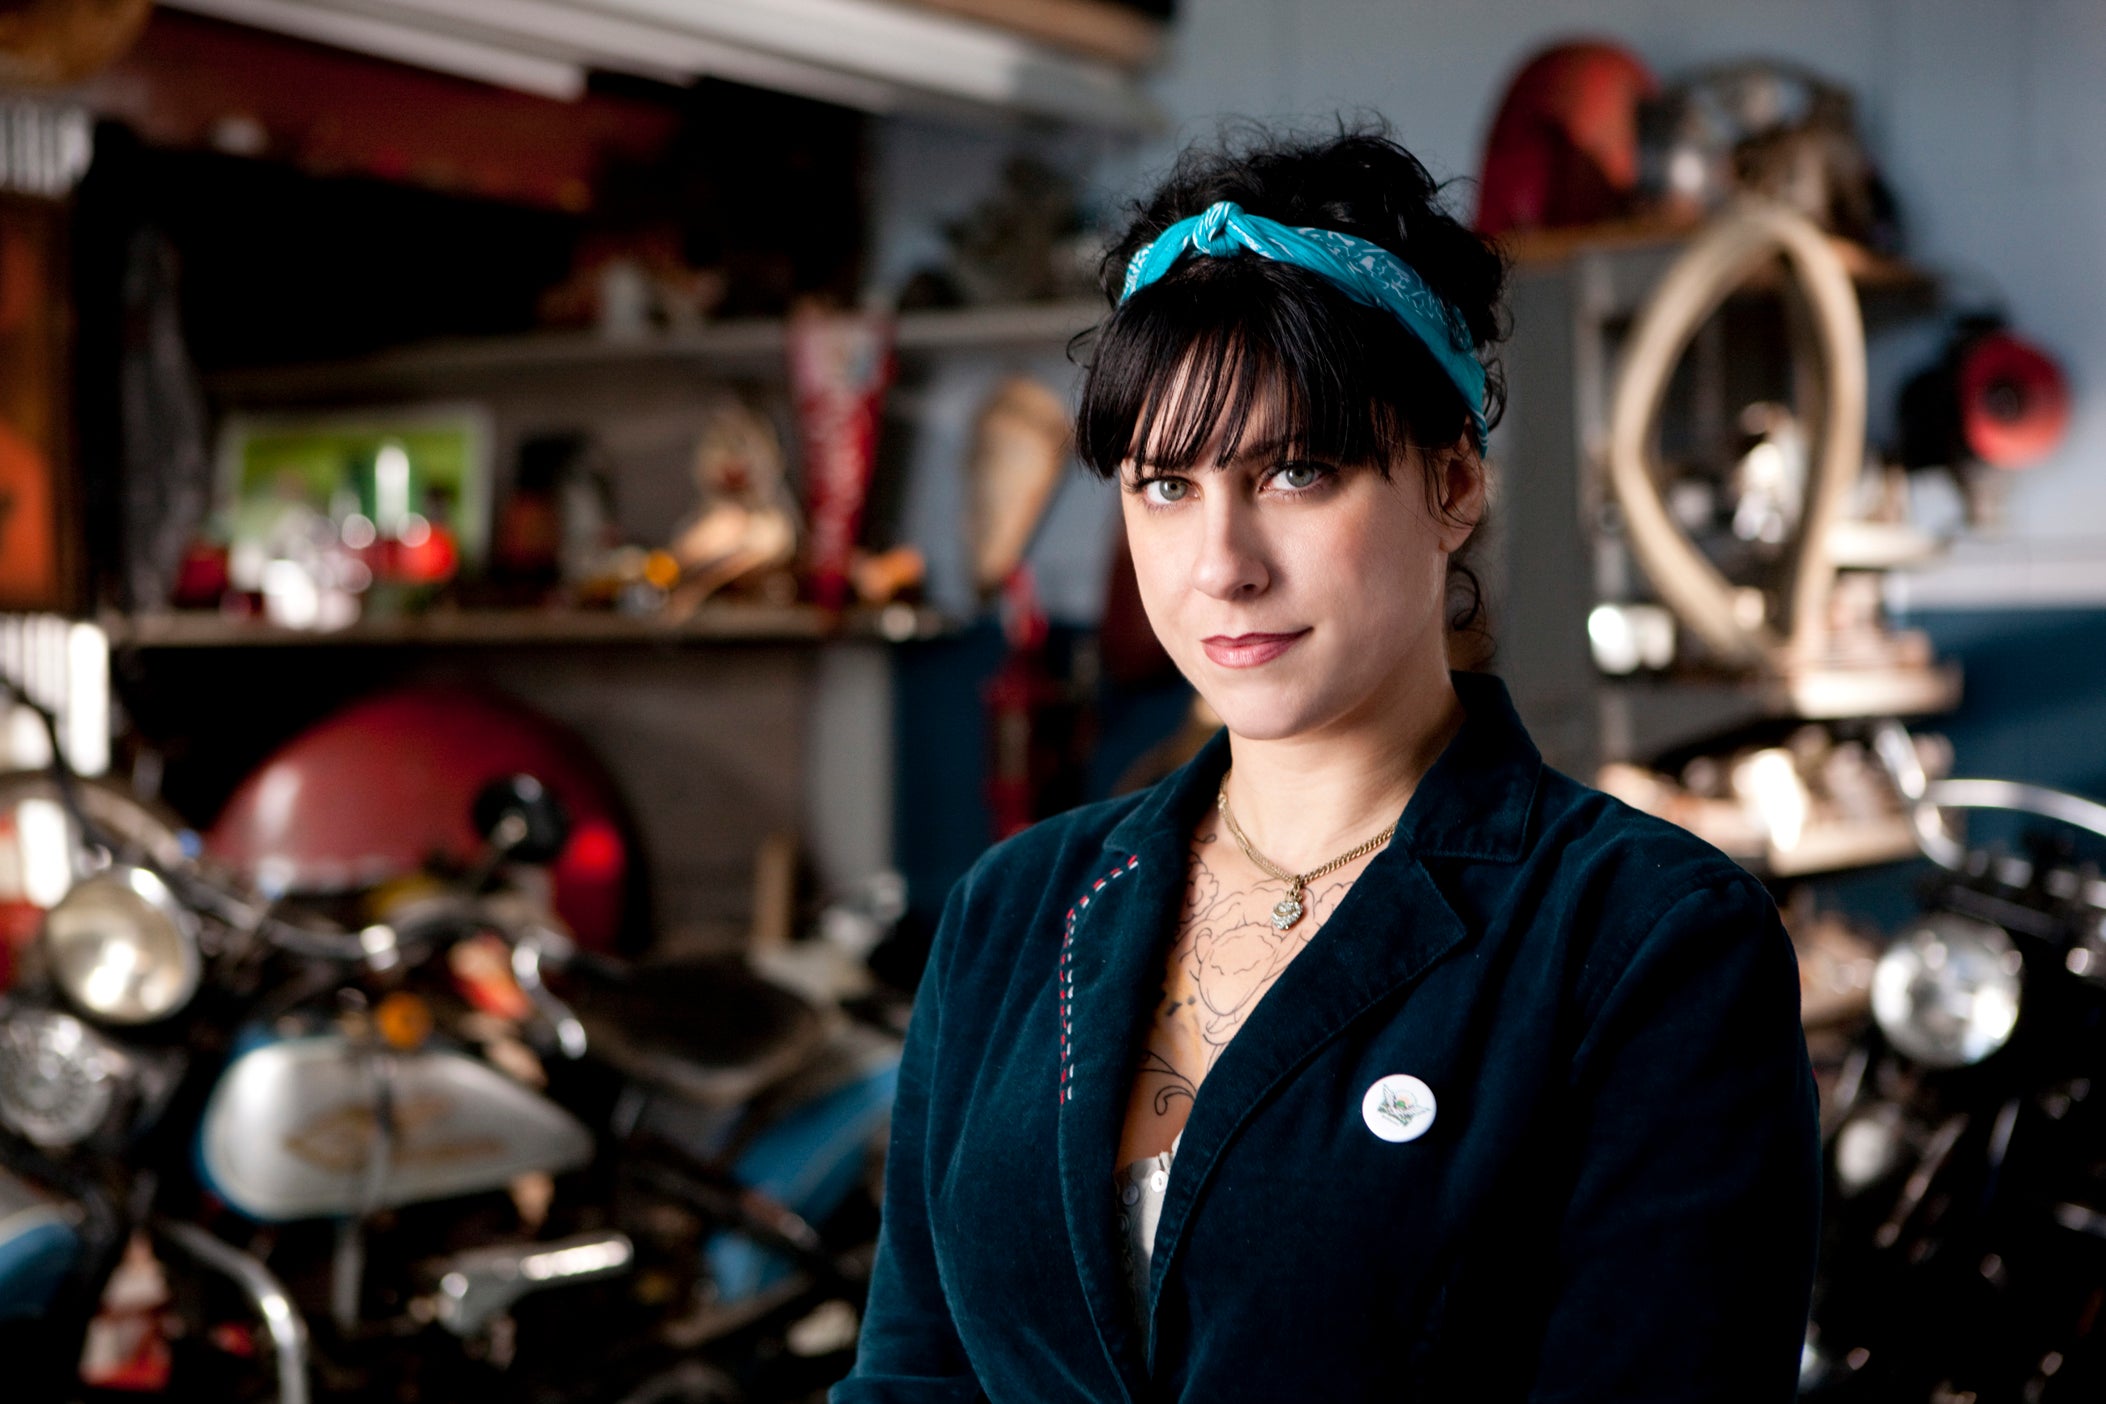 Danielle Colby with blue headband in her hair on 'American Pickers'